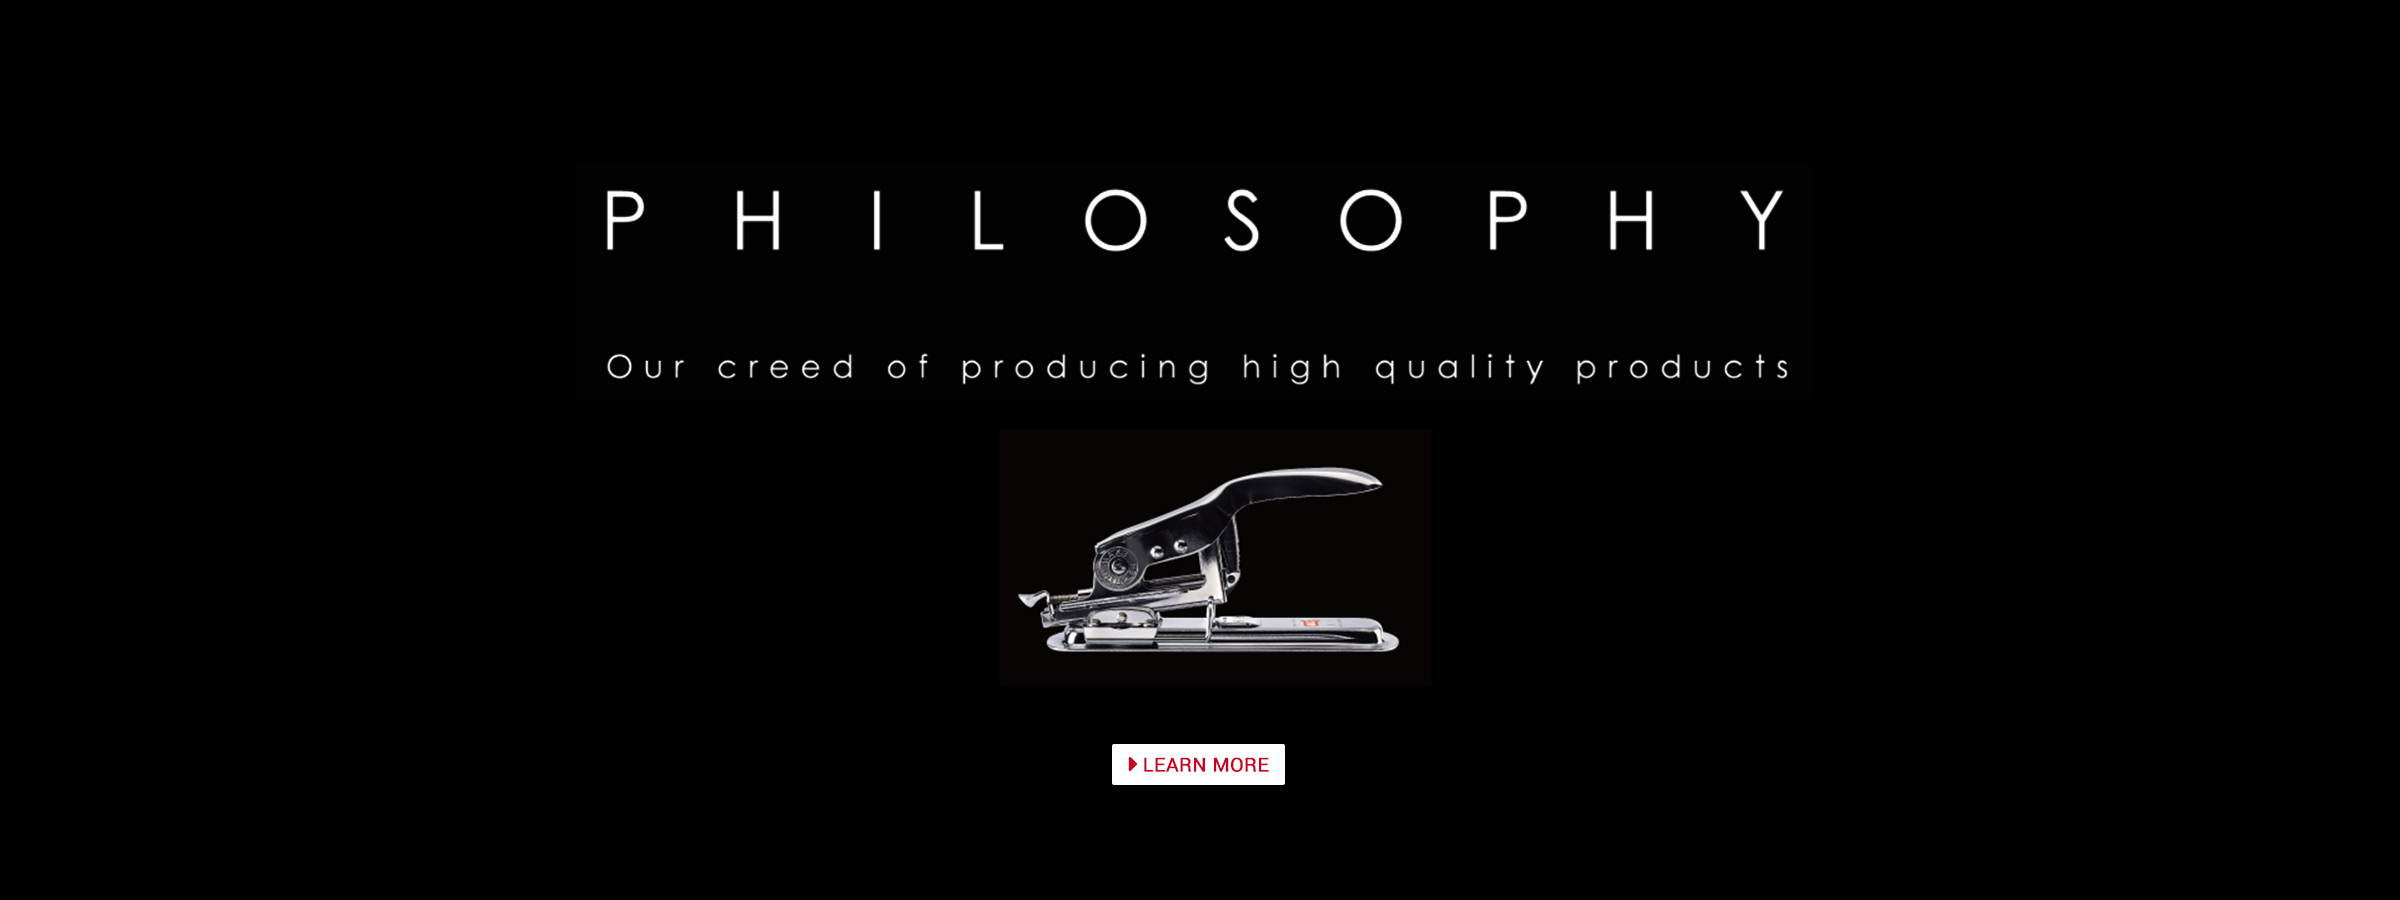 Philosophy Our creed of producing high quality products